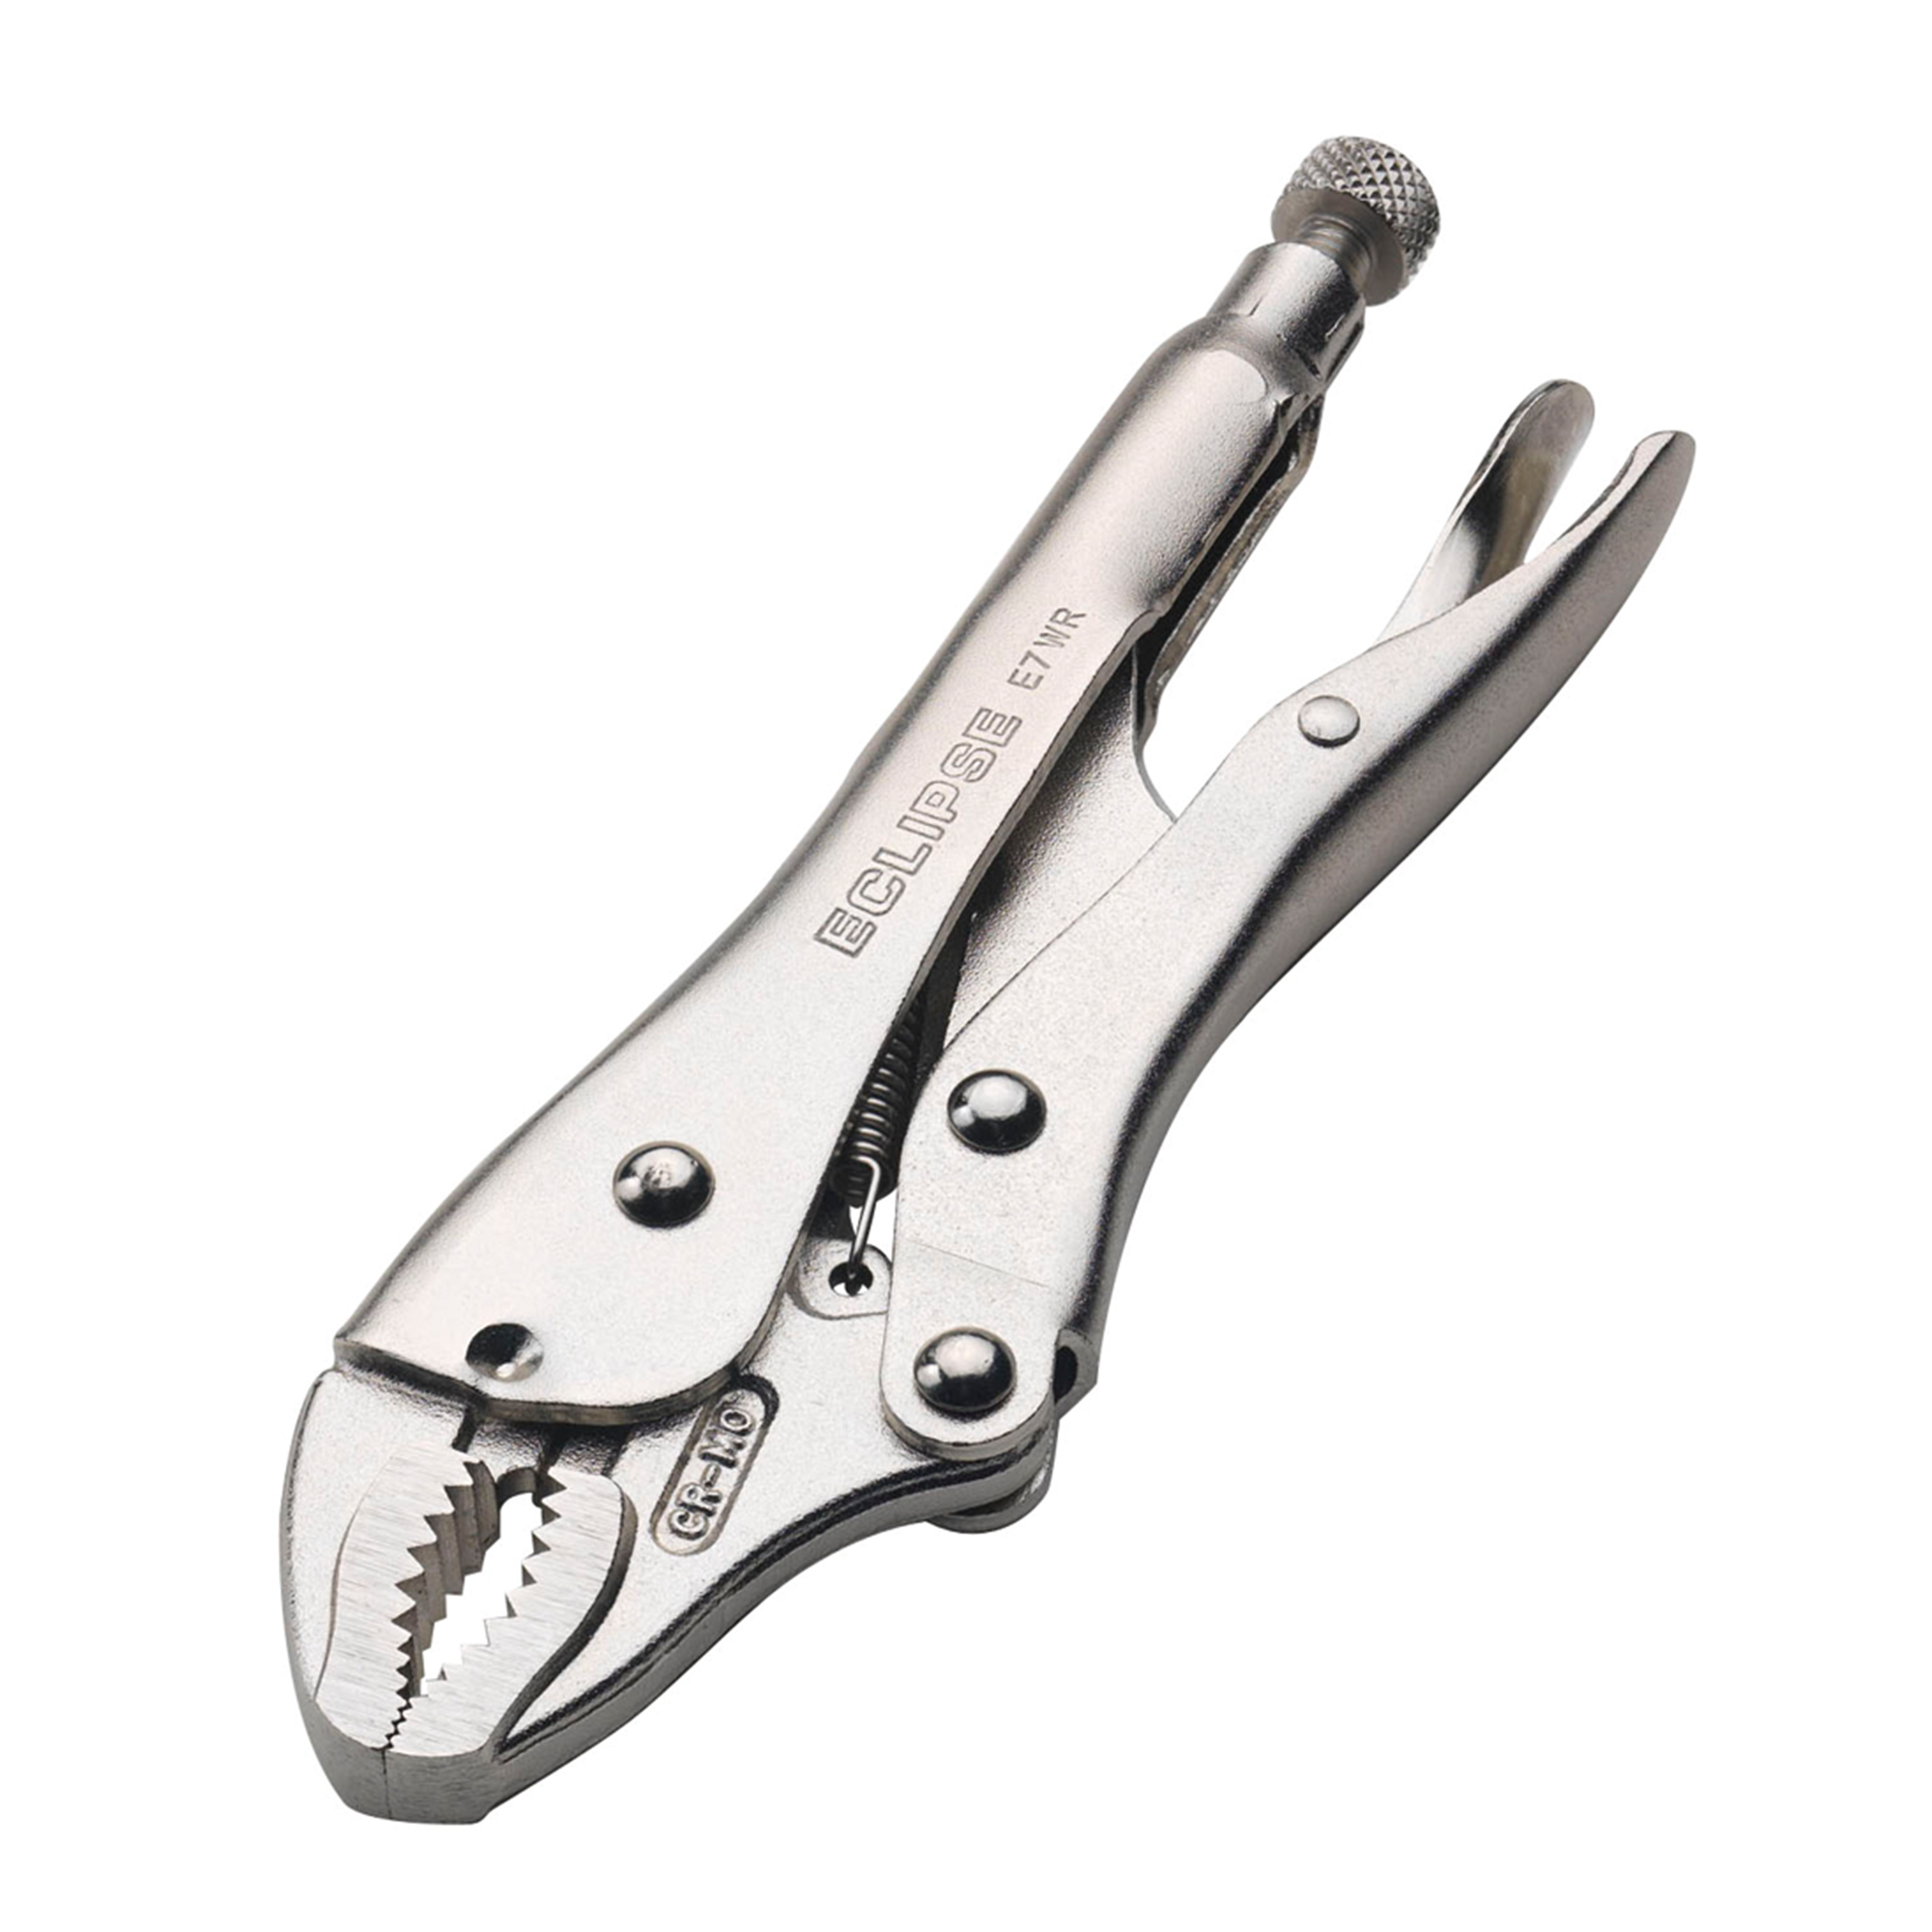 Locking Plier Curved Jaw with Cutter by Eclipse